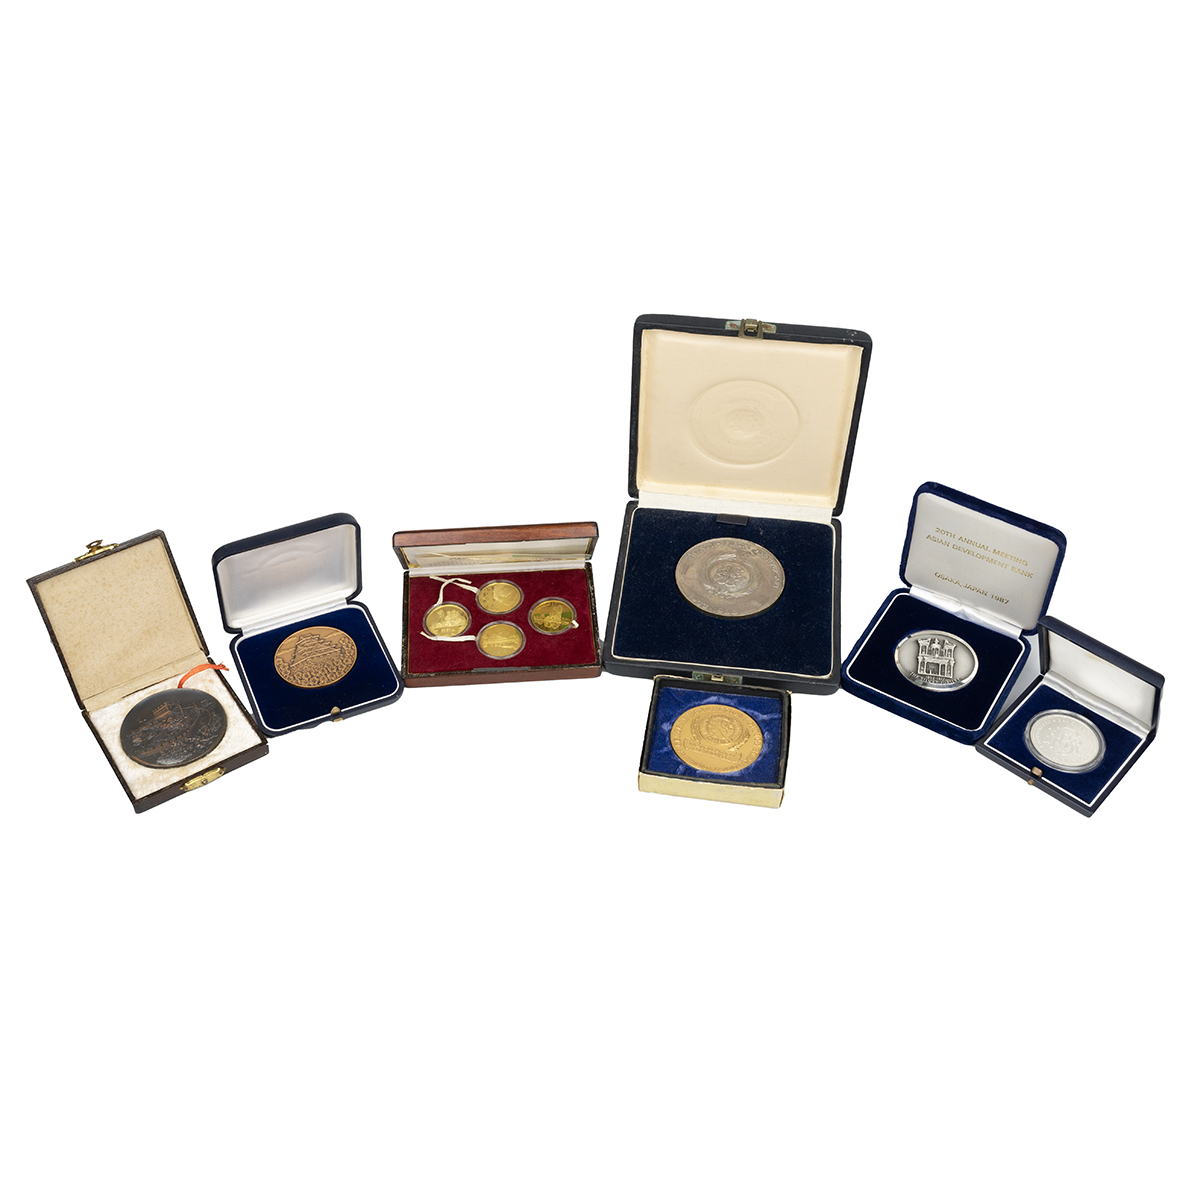 Seven (7) commemorative mint and souvenir medals in copper, bronze and silver, all boxed. Include...